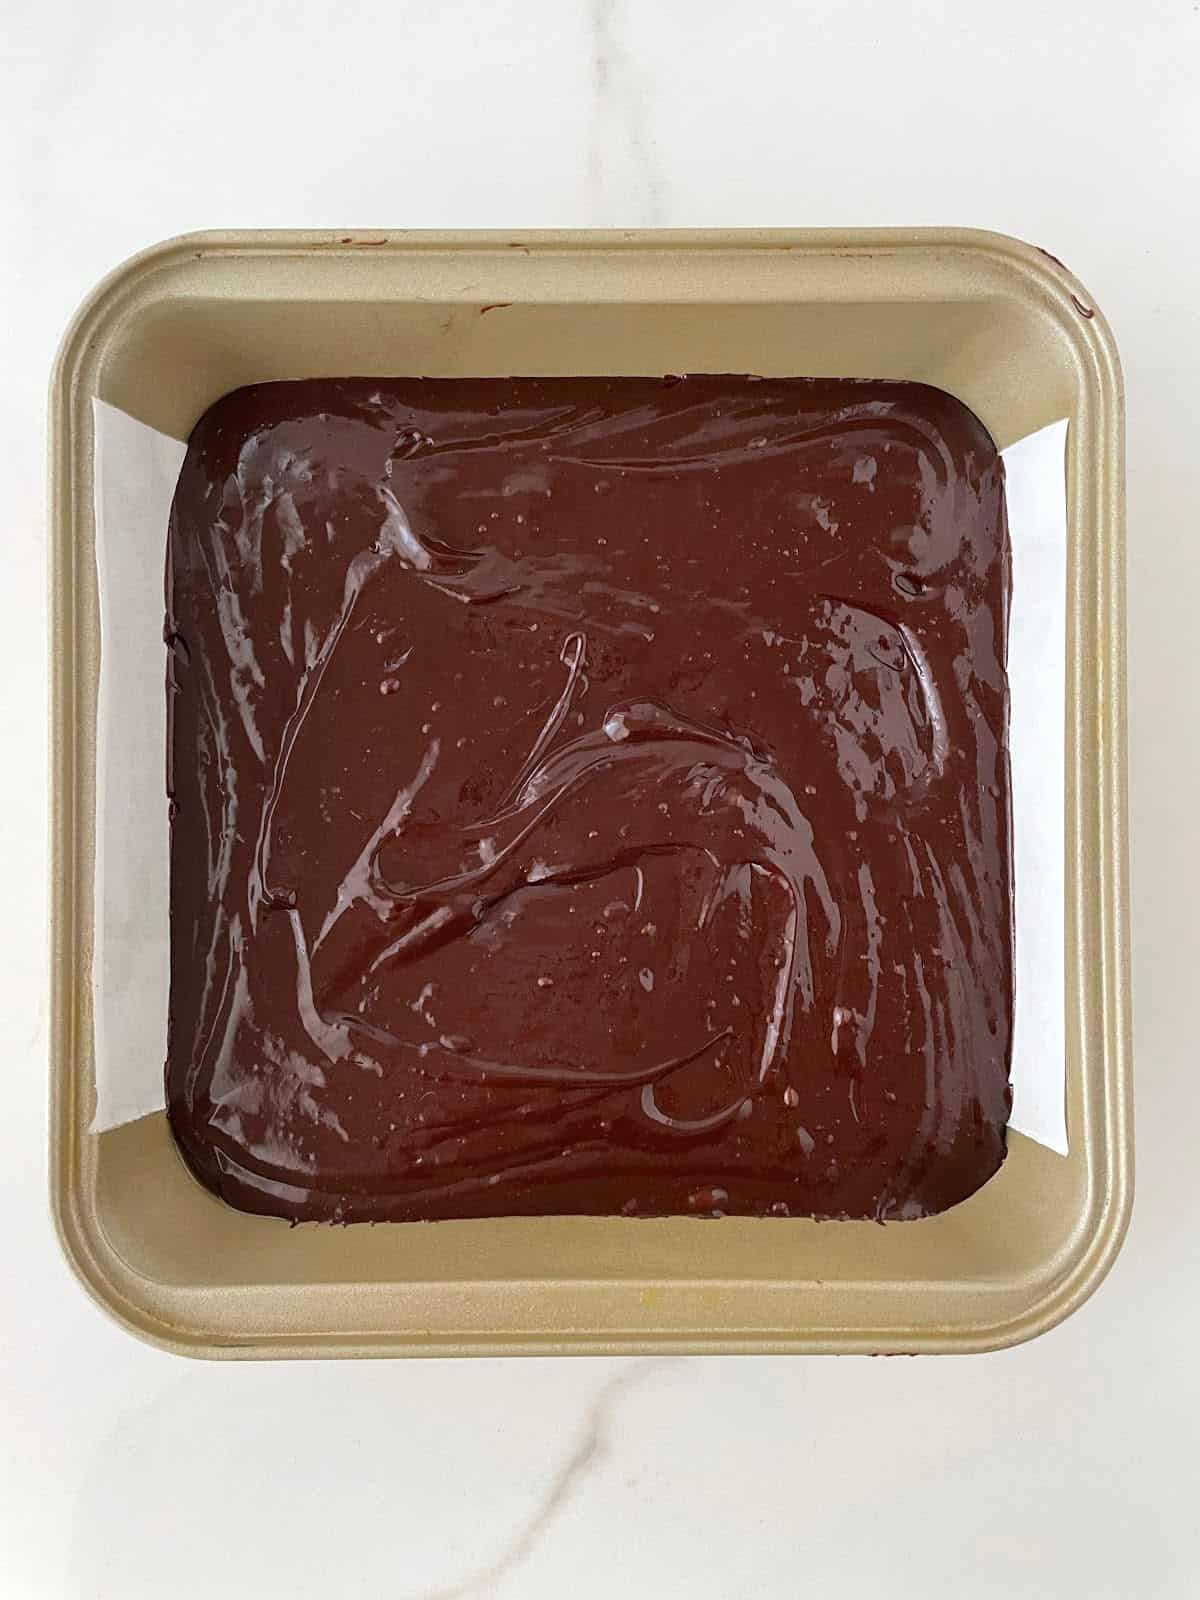 Square gold pan lined with parchment paper, with brownie batter on a white marble surface.